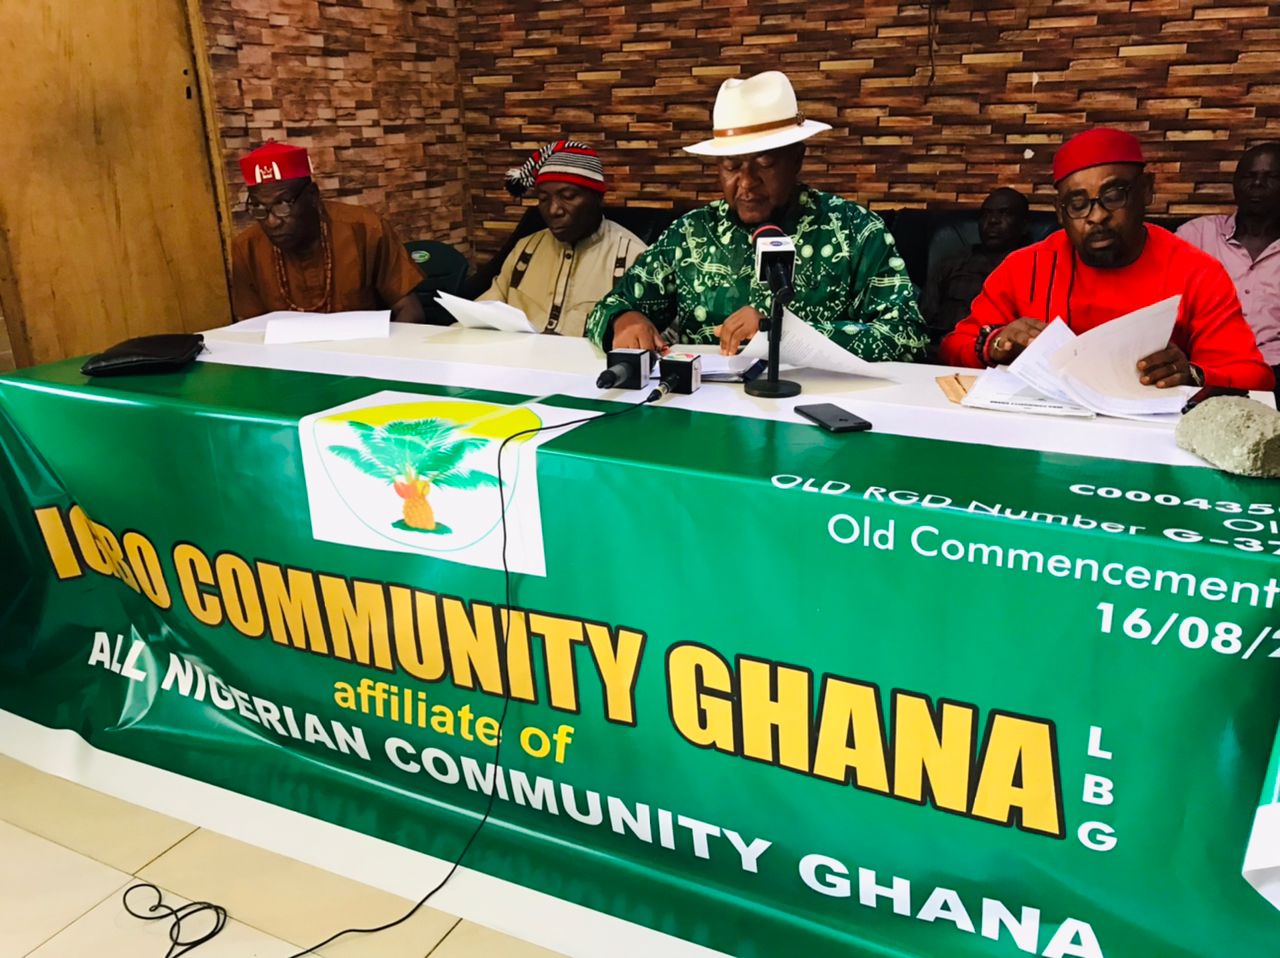 Igbo Community accuses High Commission of disregarding court decision